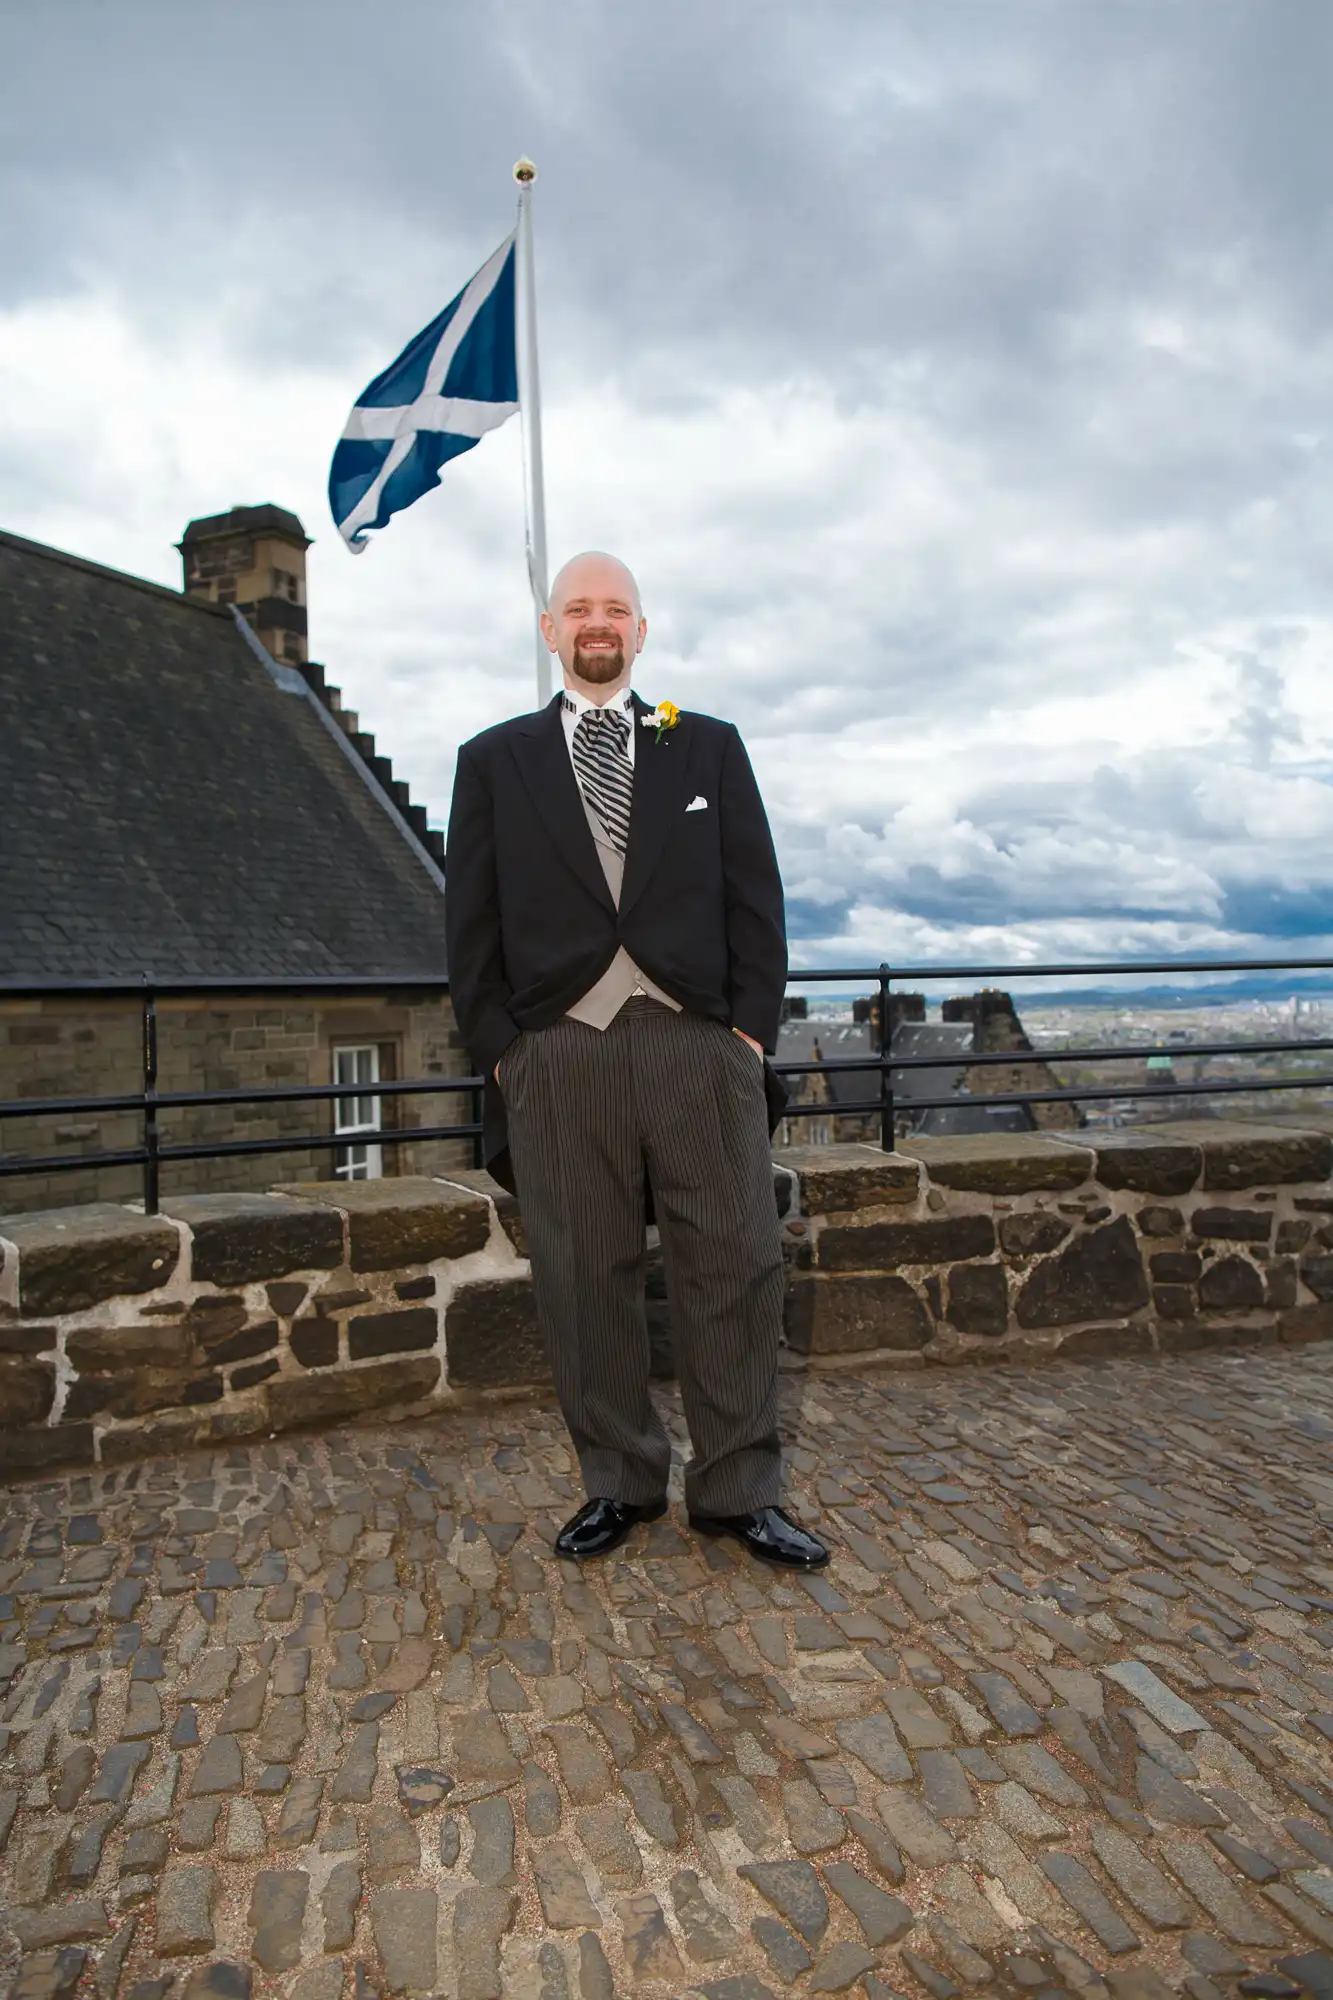 A man in a suit standing in front of a scottish flag at edinburgh castle with cloudy skies in the background.